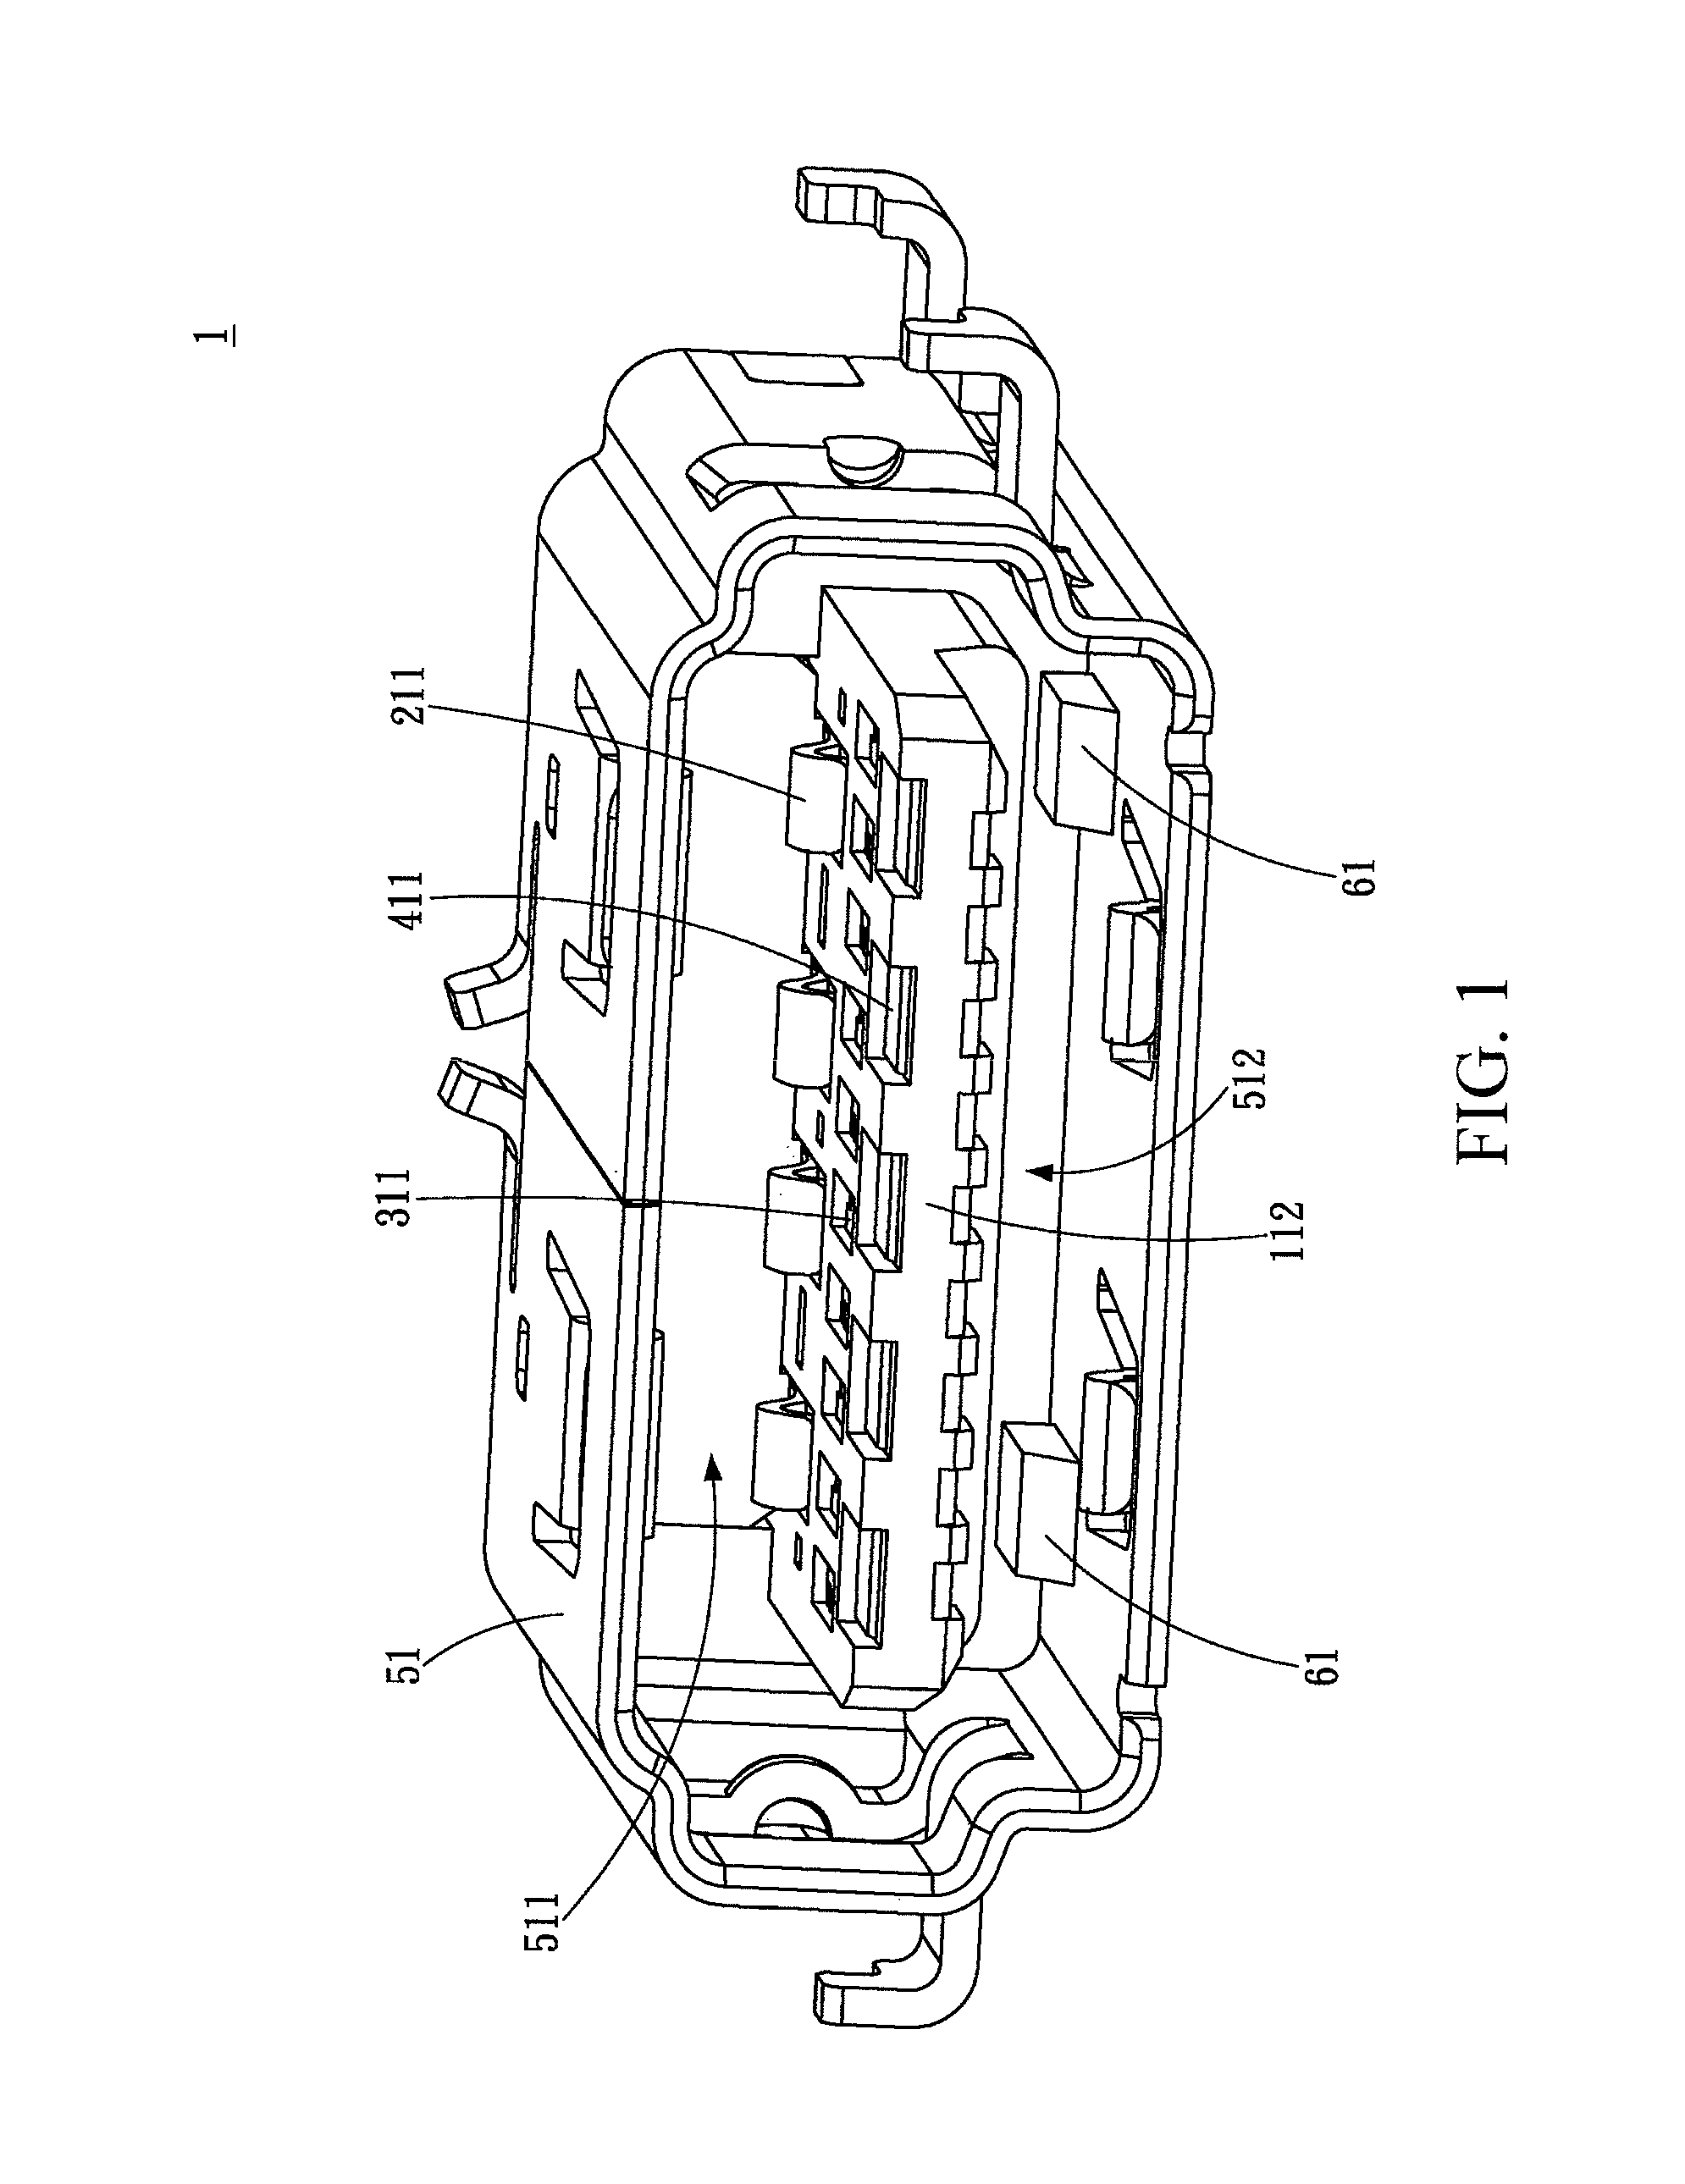 Electrical connector socket capable of transmitting different signals